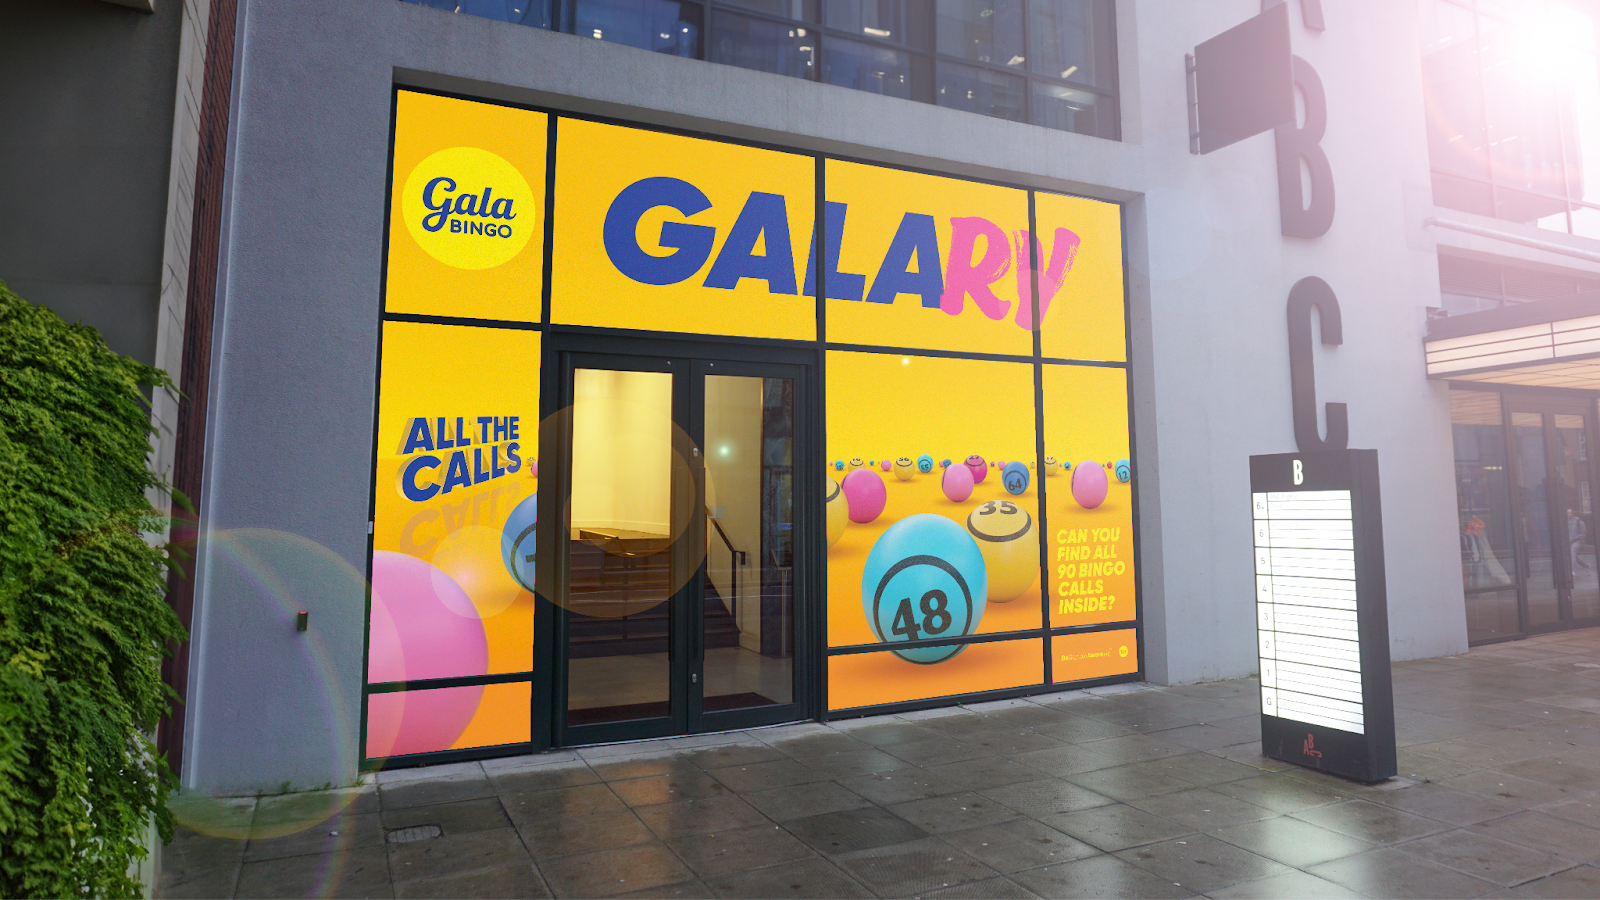 Gala Bingo event in Manchester, yellow store front with bingo balls on it